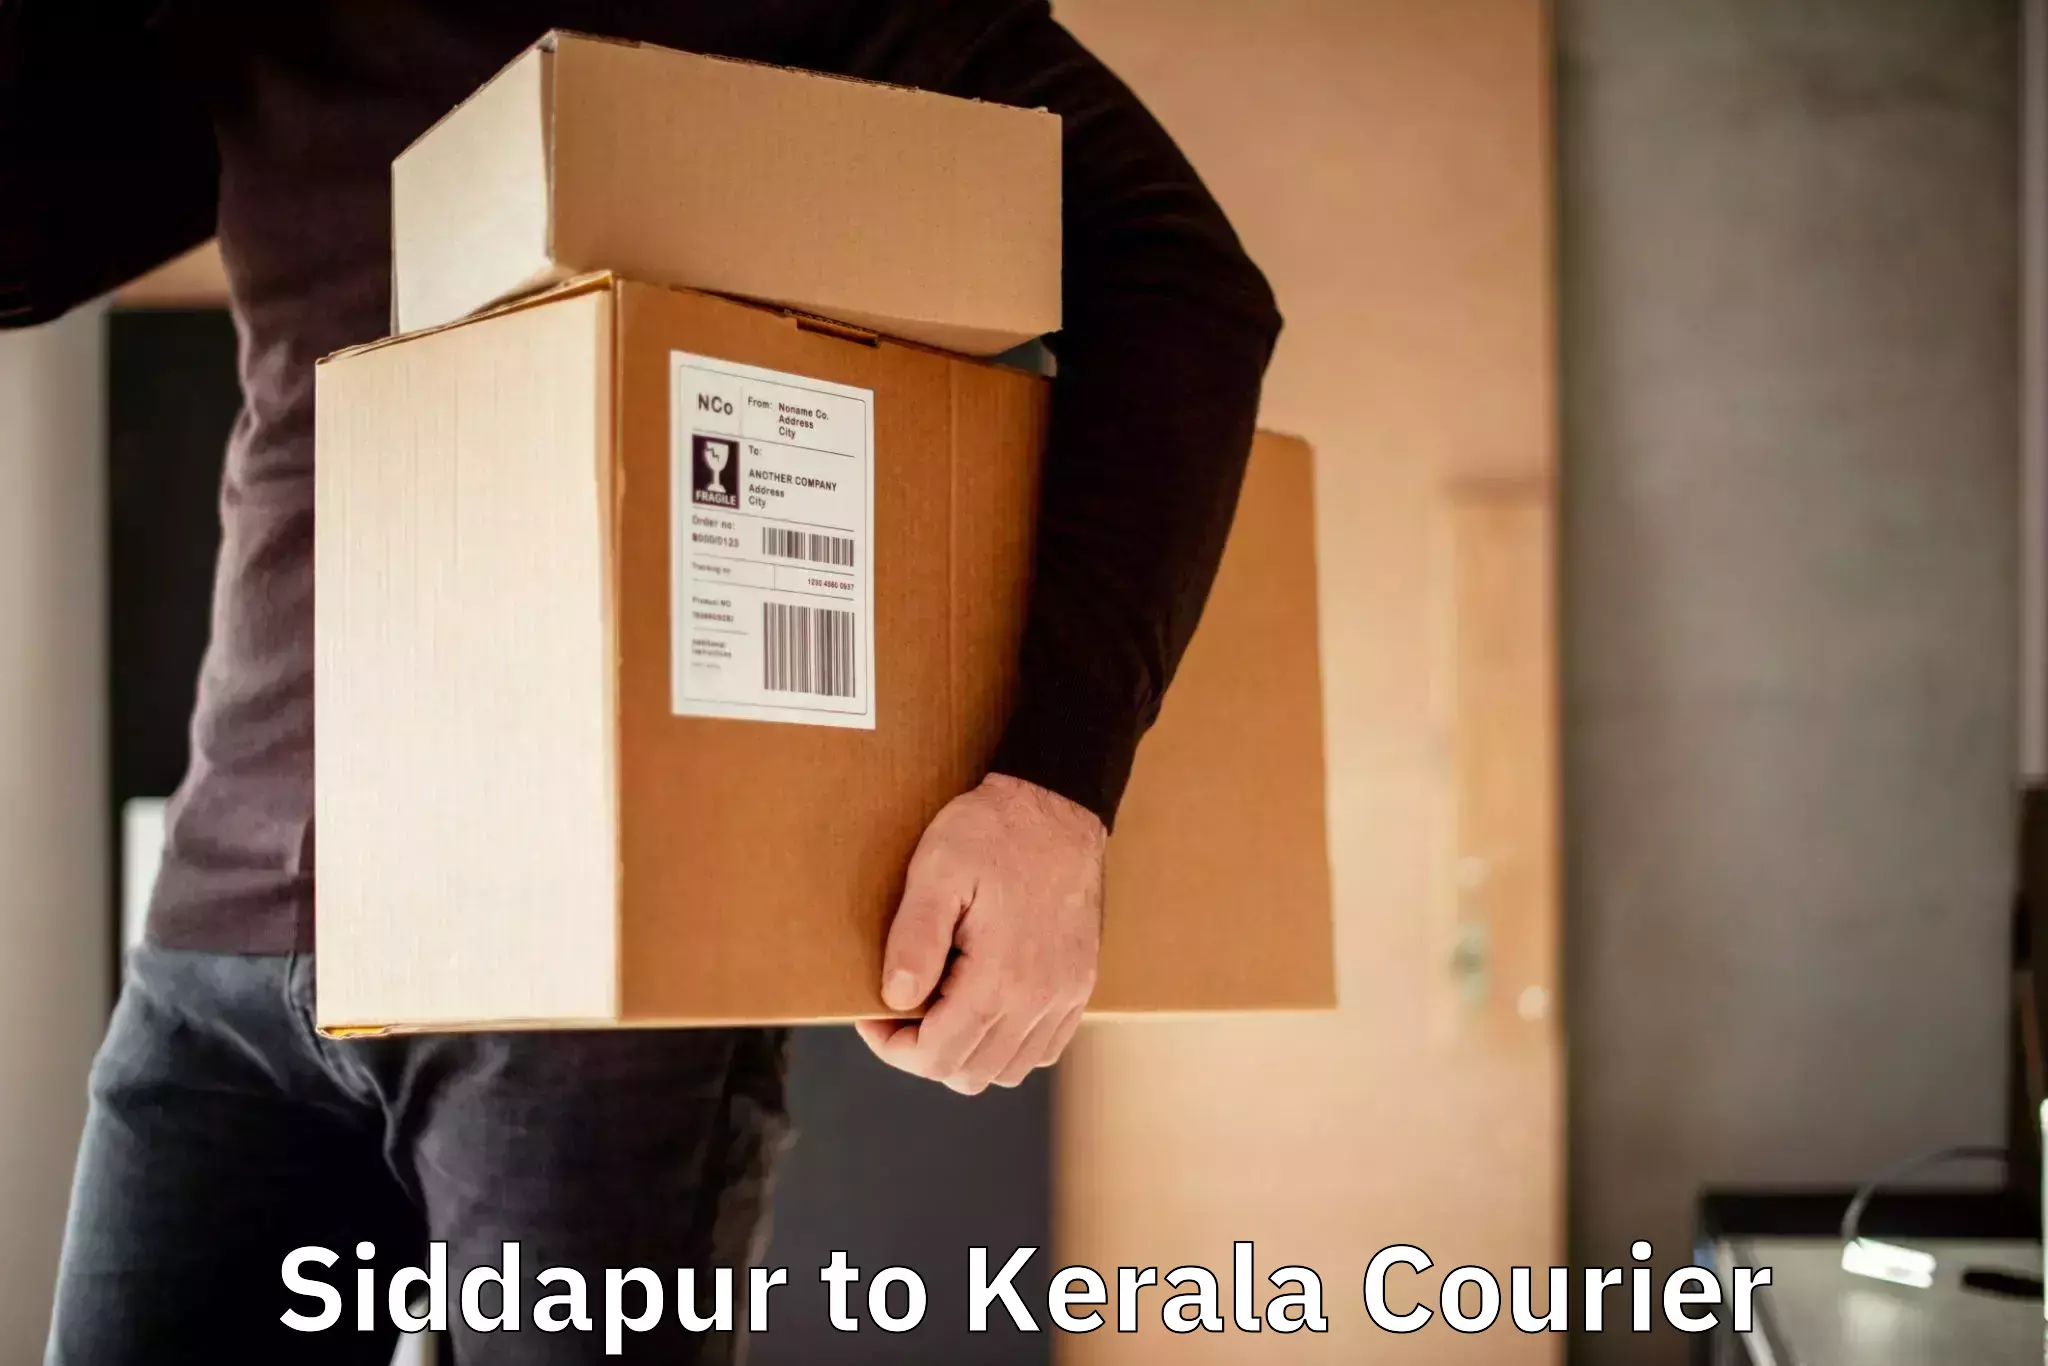 Next day courier Siddapur to Ernakulam